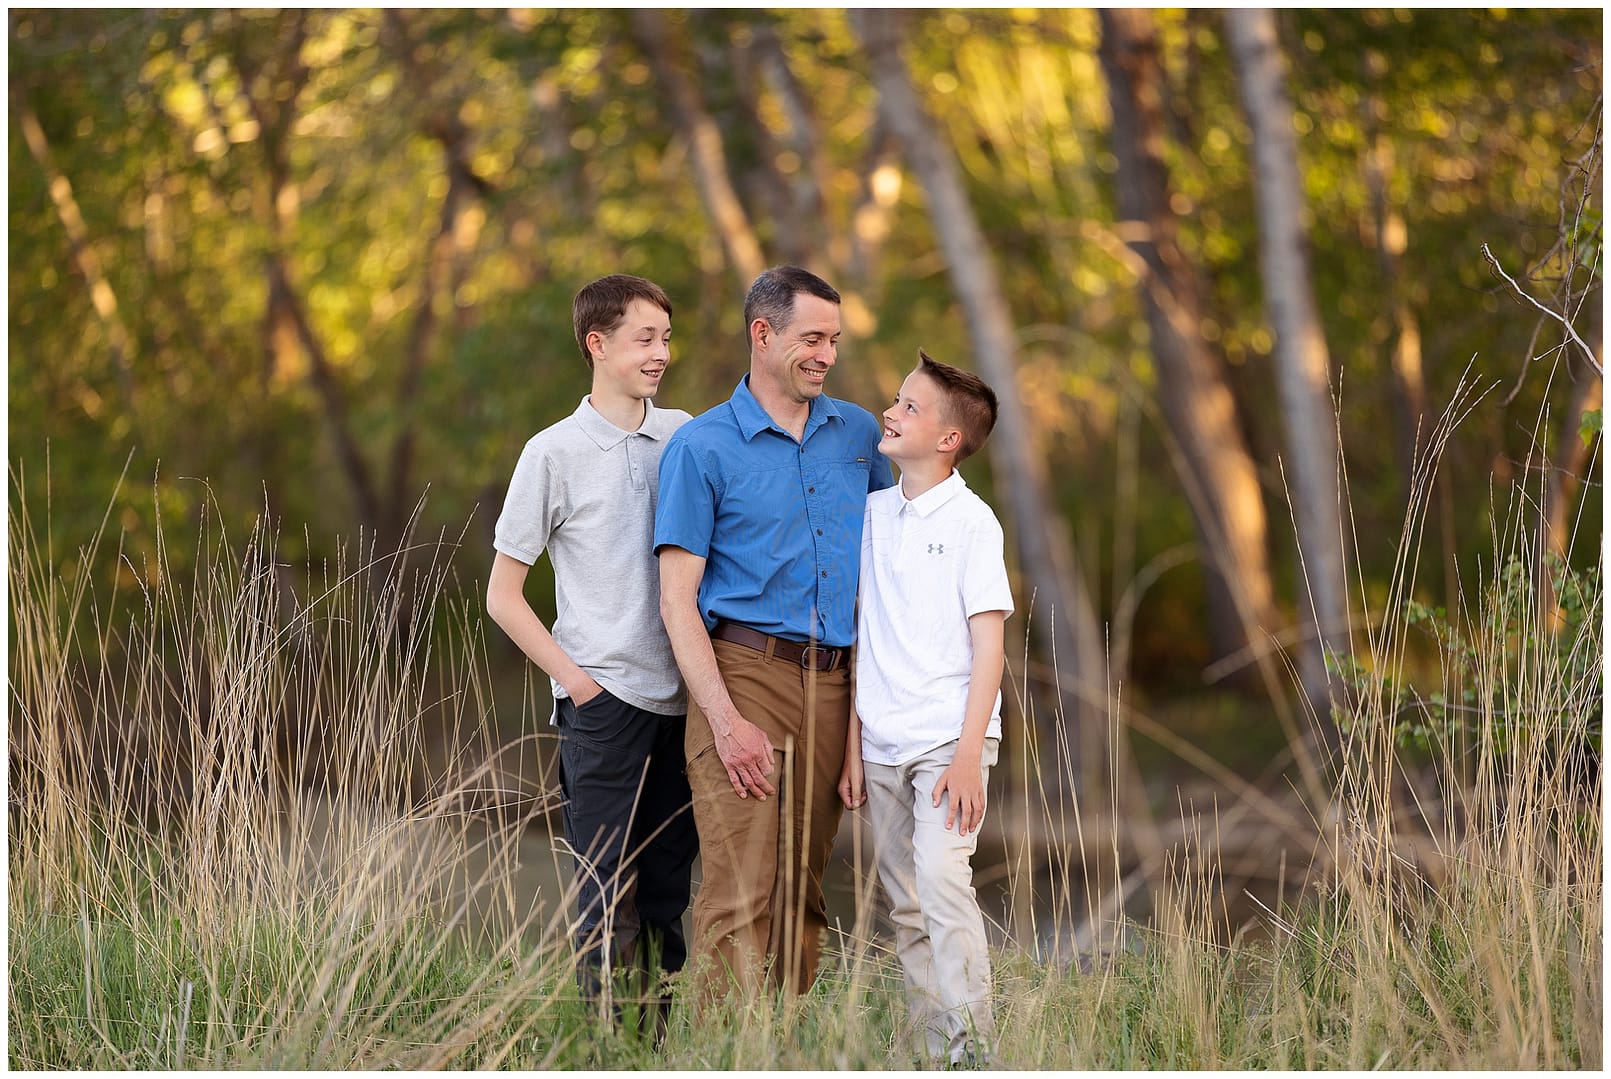 Dad with his sons. Photos by Tiffany Hix Photography.